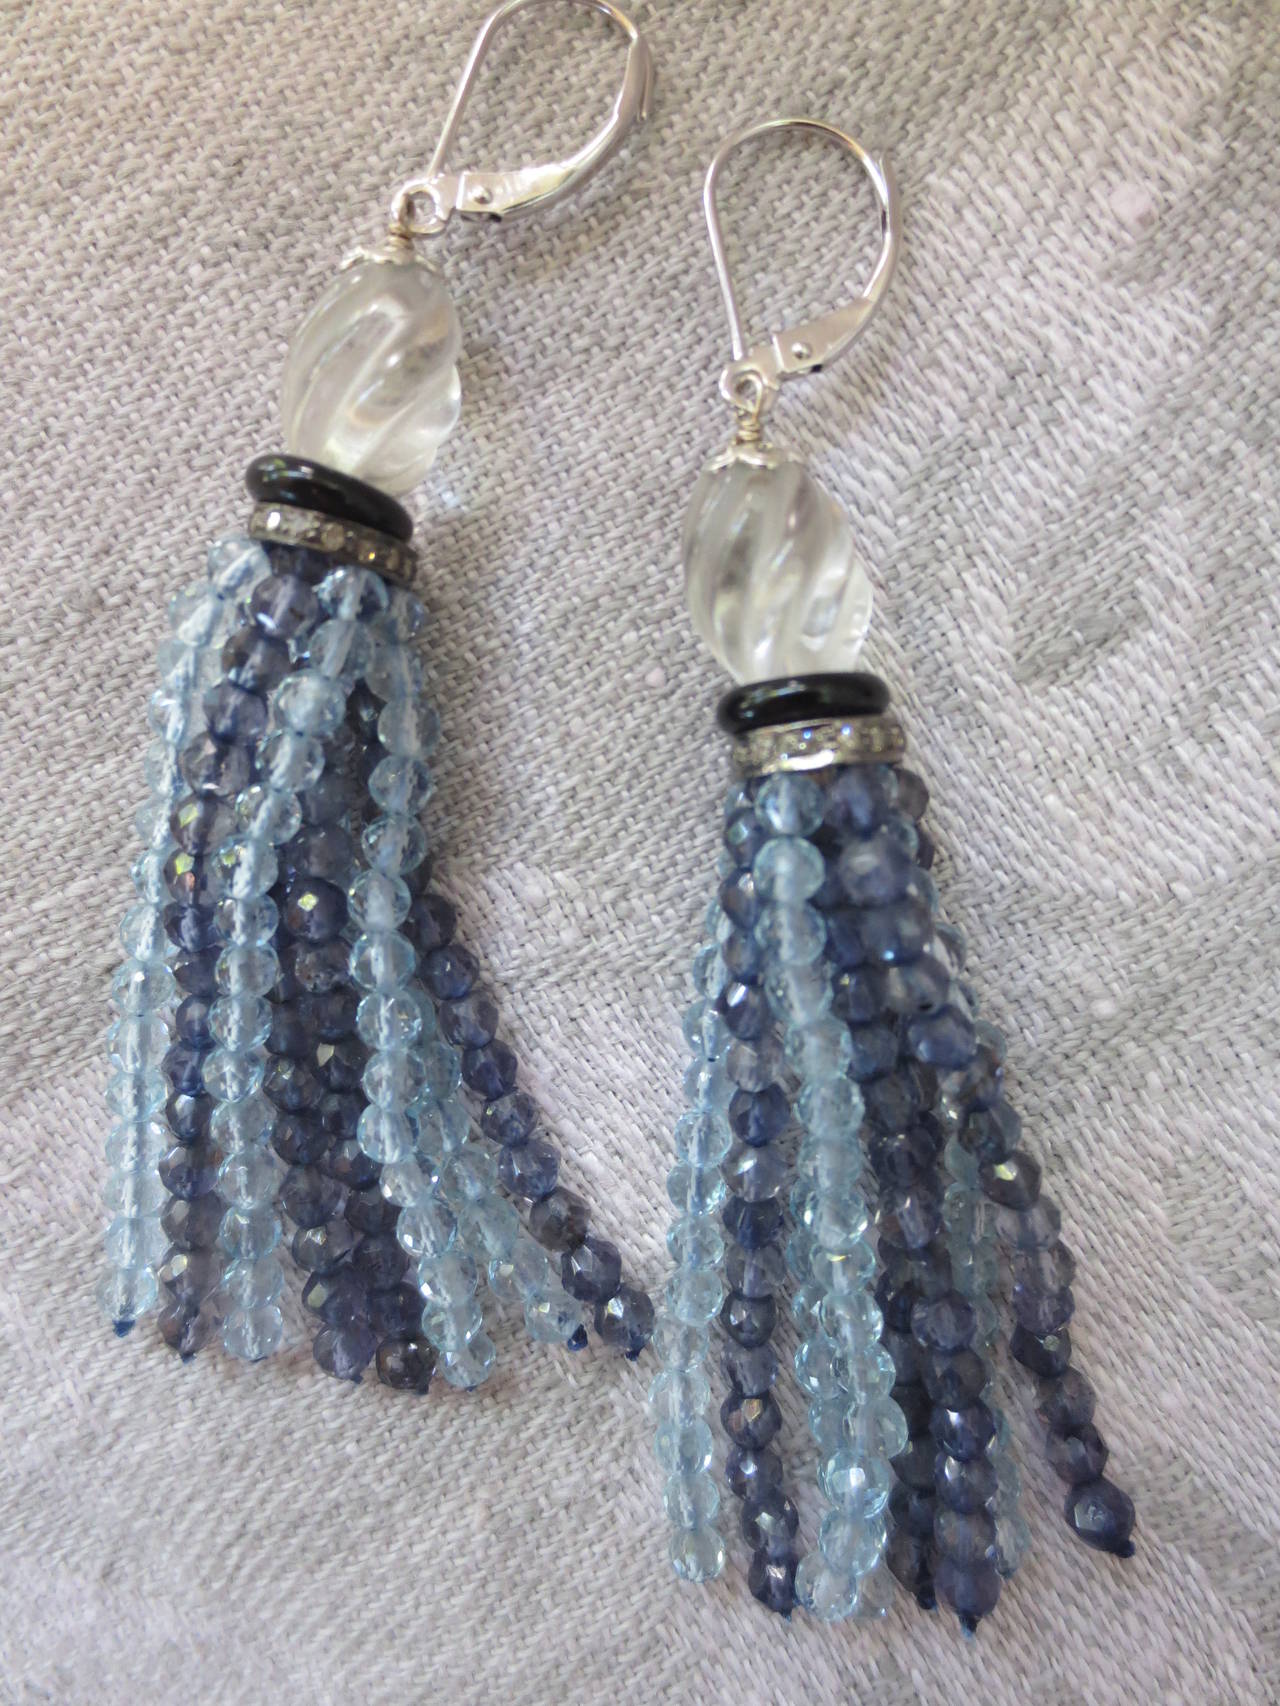 These elegant earrings are made of tiny hand selected iolite and aquamarine faceted beads. The strands are made of 2mm beads  to create a light and ethereal effect. The strands hang from a larger antique carved quartz bead accented by tiny a black